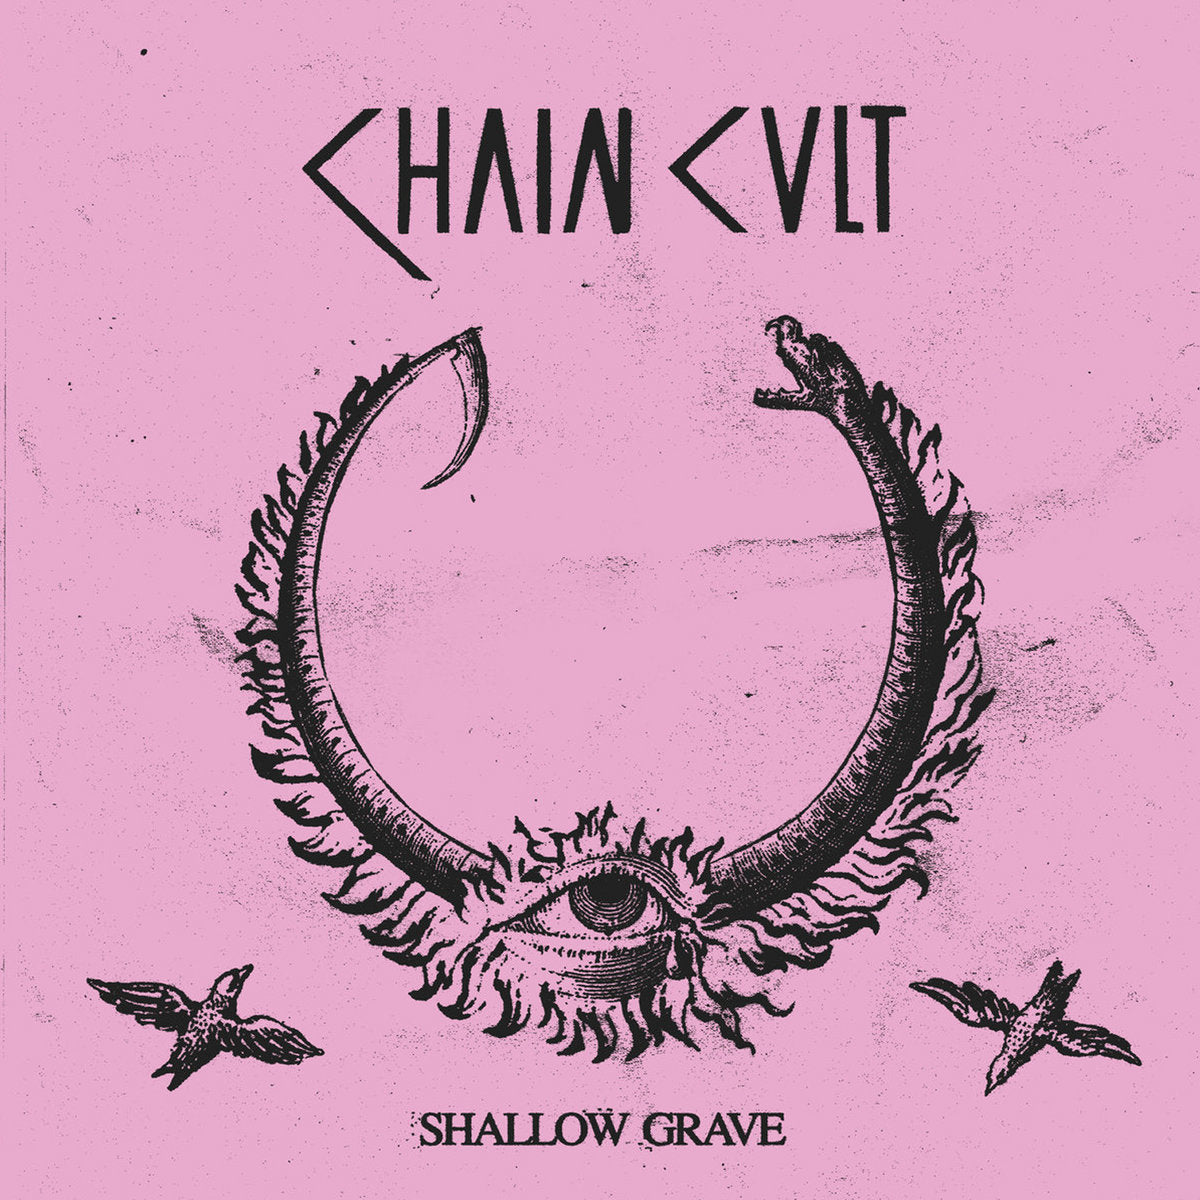 Chain Cult "Shallow Grave"